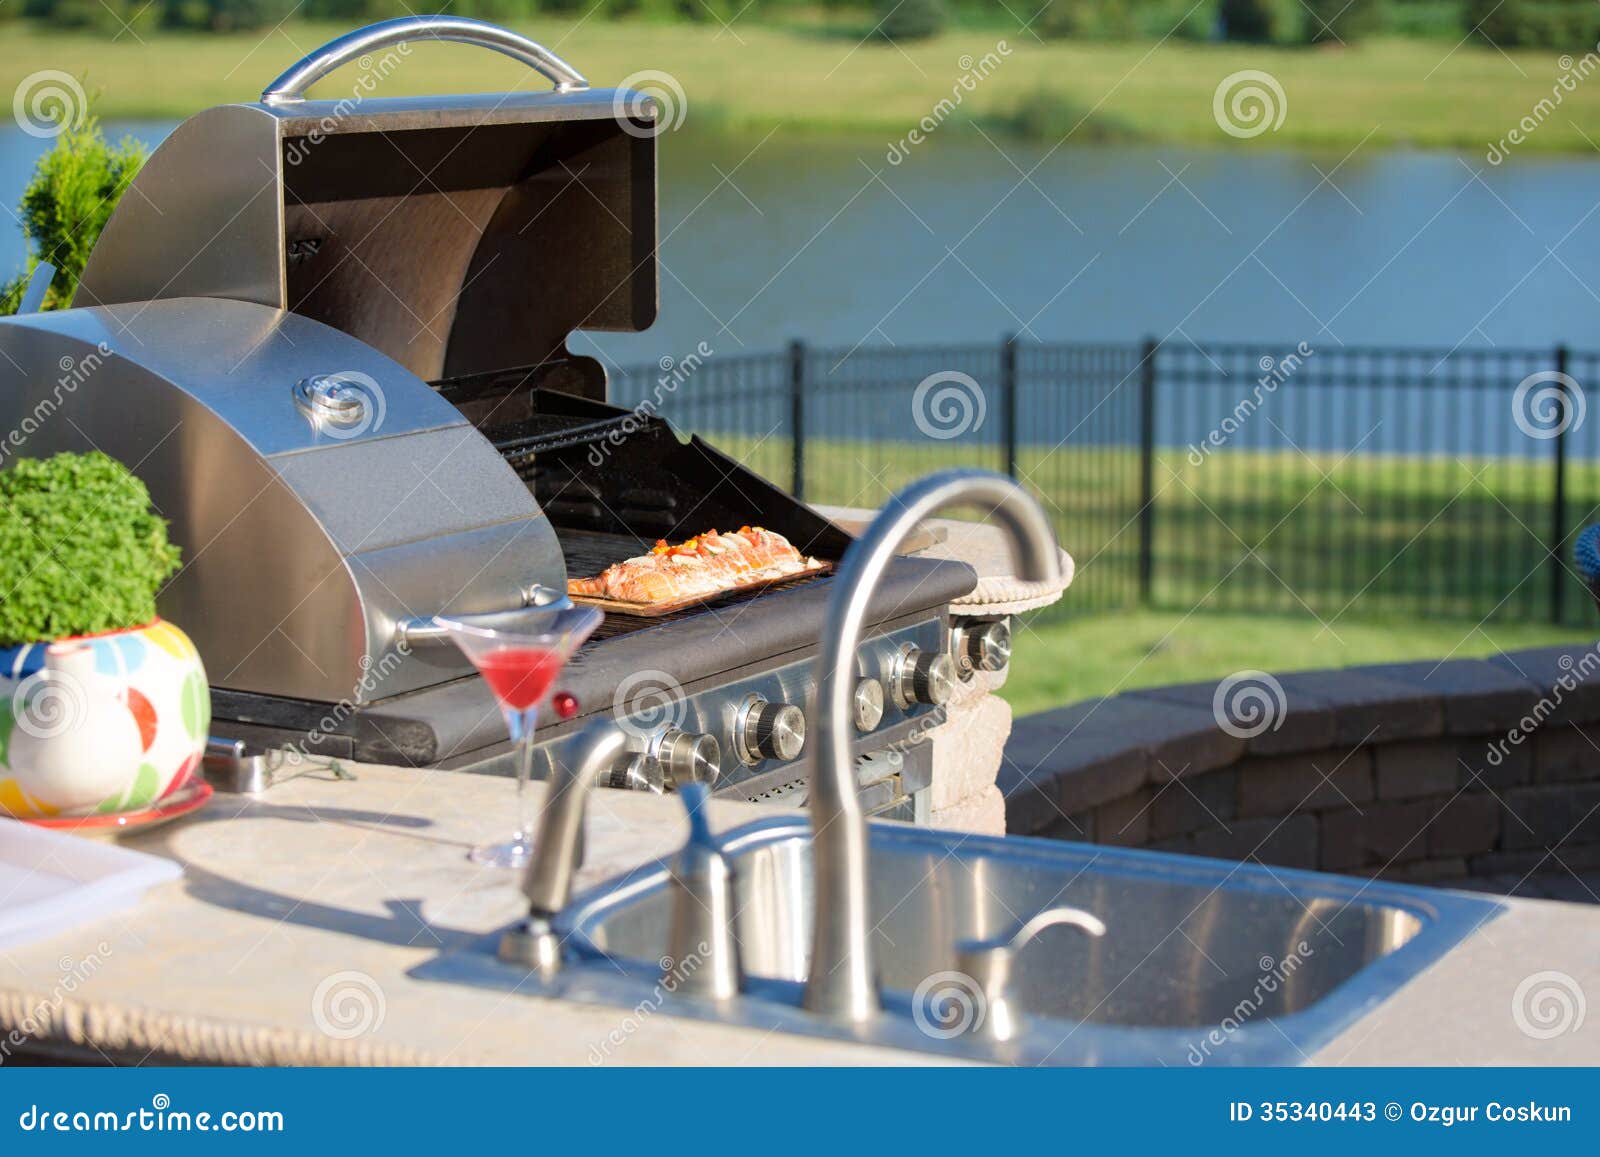 cooking cedar salmon on the barbecue at the outdoor kitchen